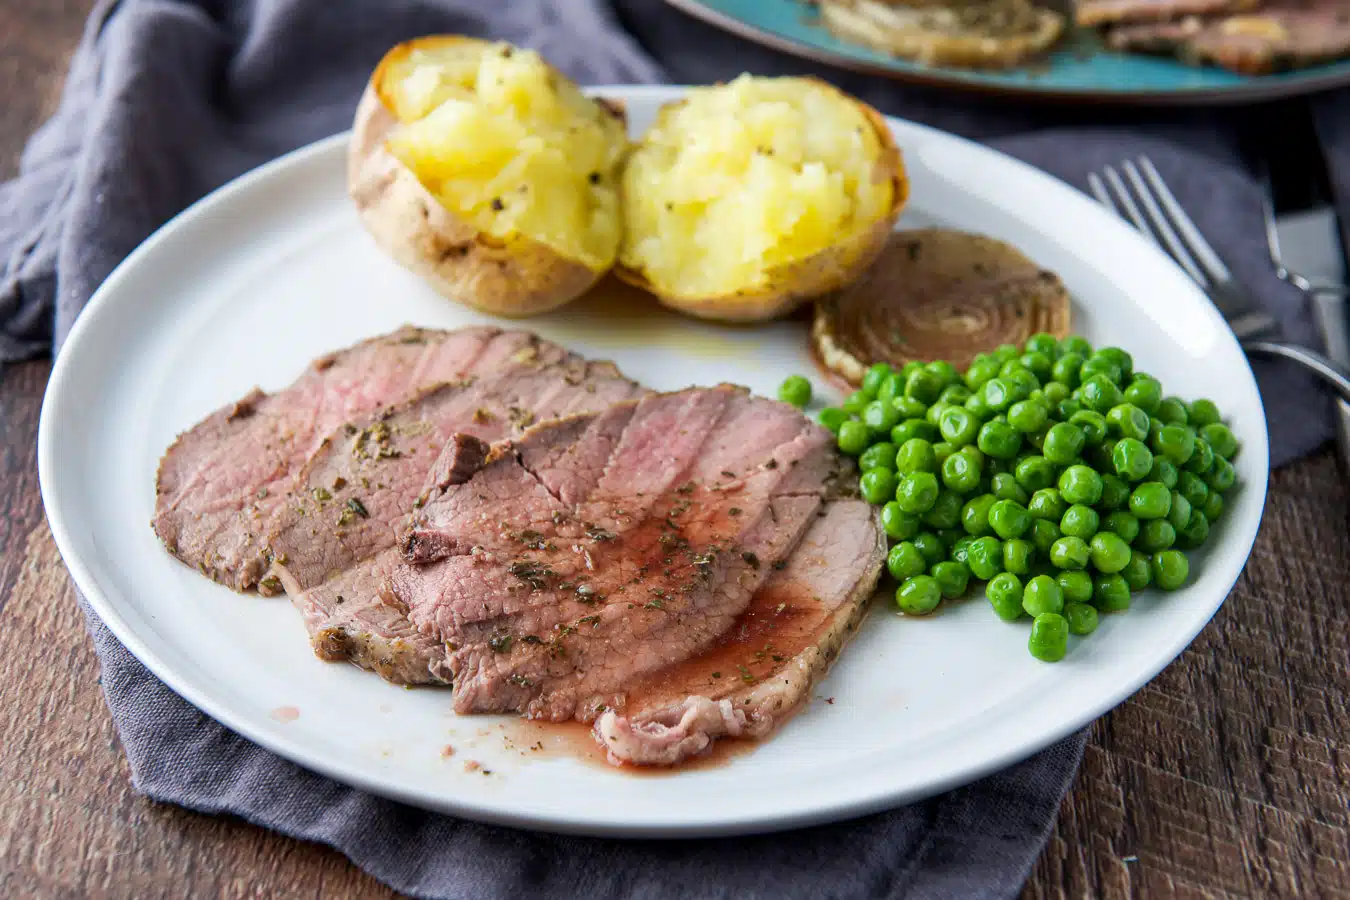 A white plate with three slices of beef with peas and a baked potato - horizontal